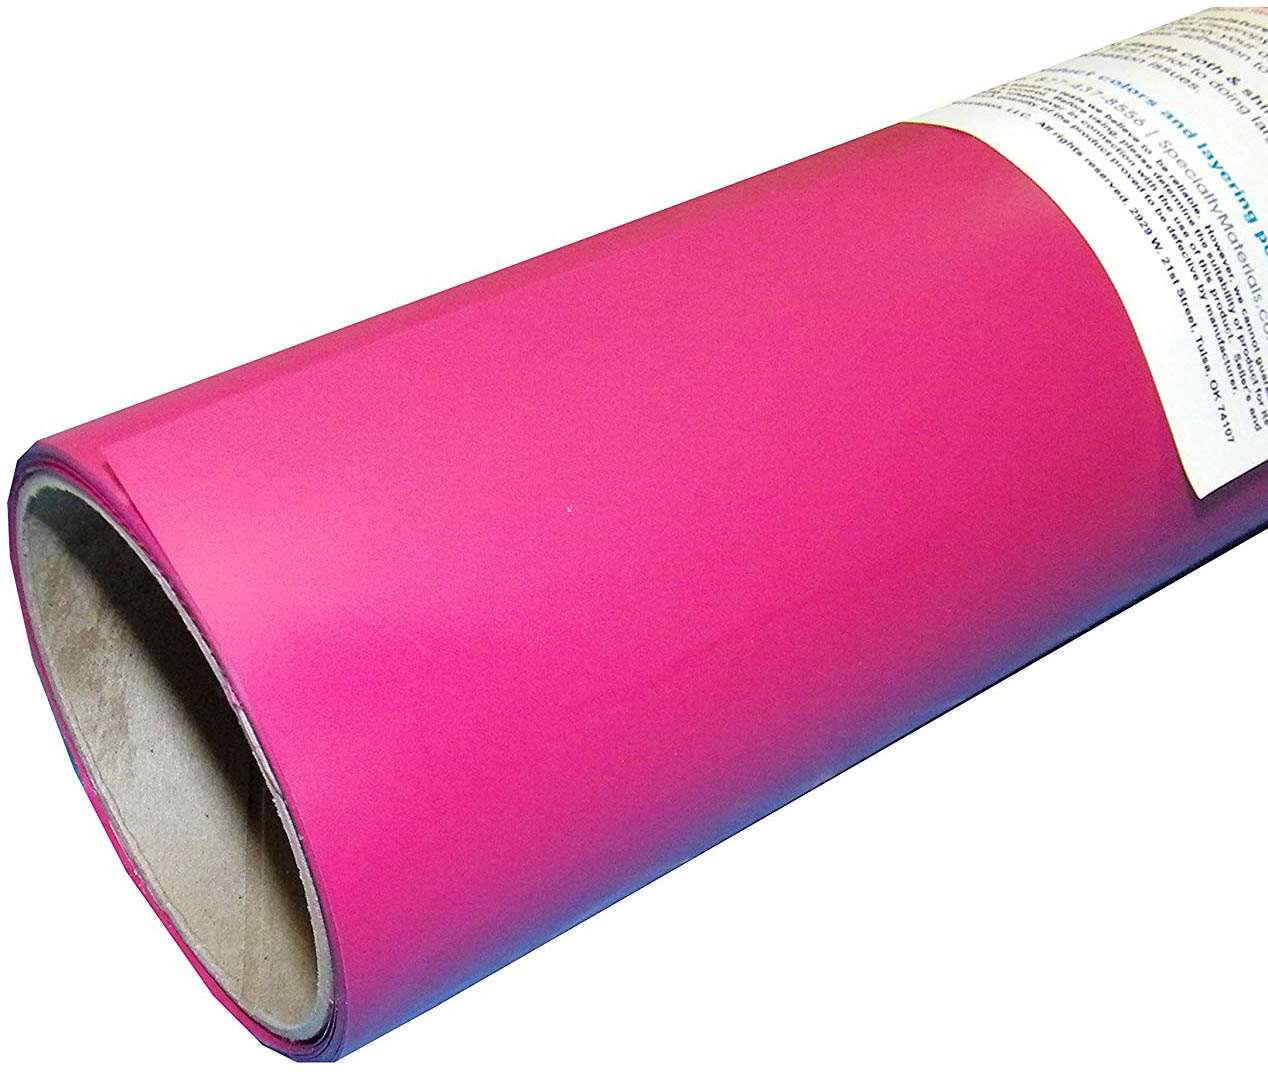 Specialty Materials ThermoFlexPLUS Hot Pink